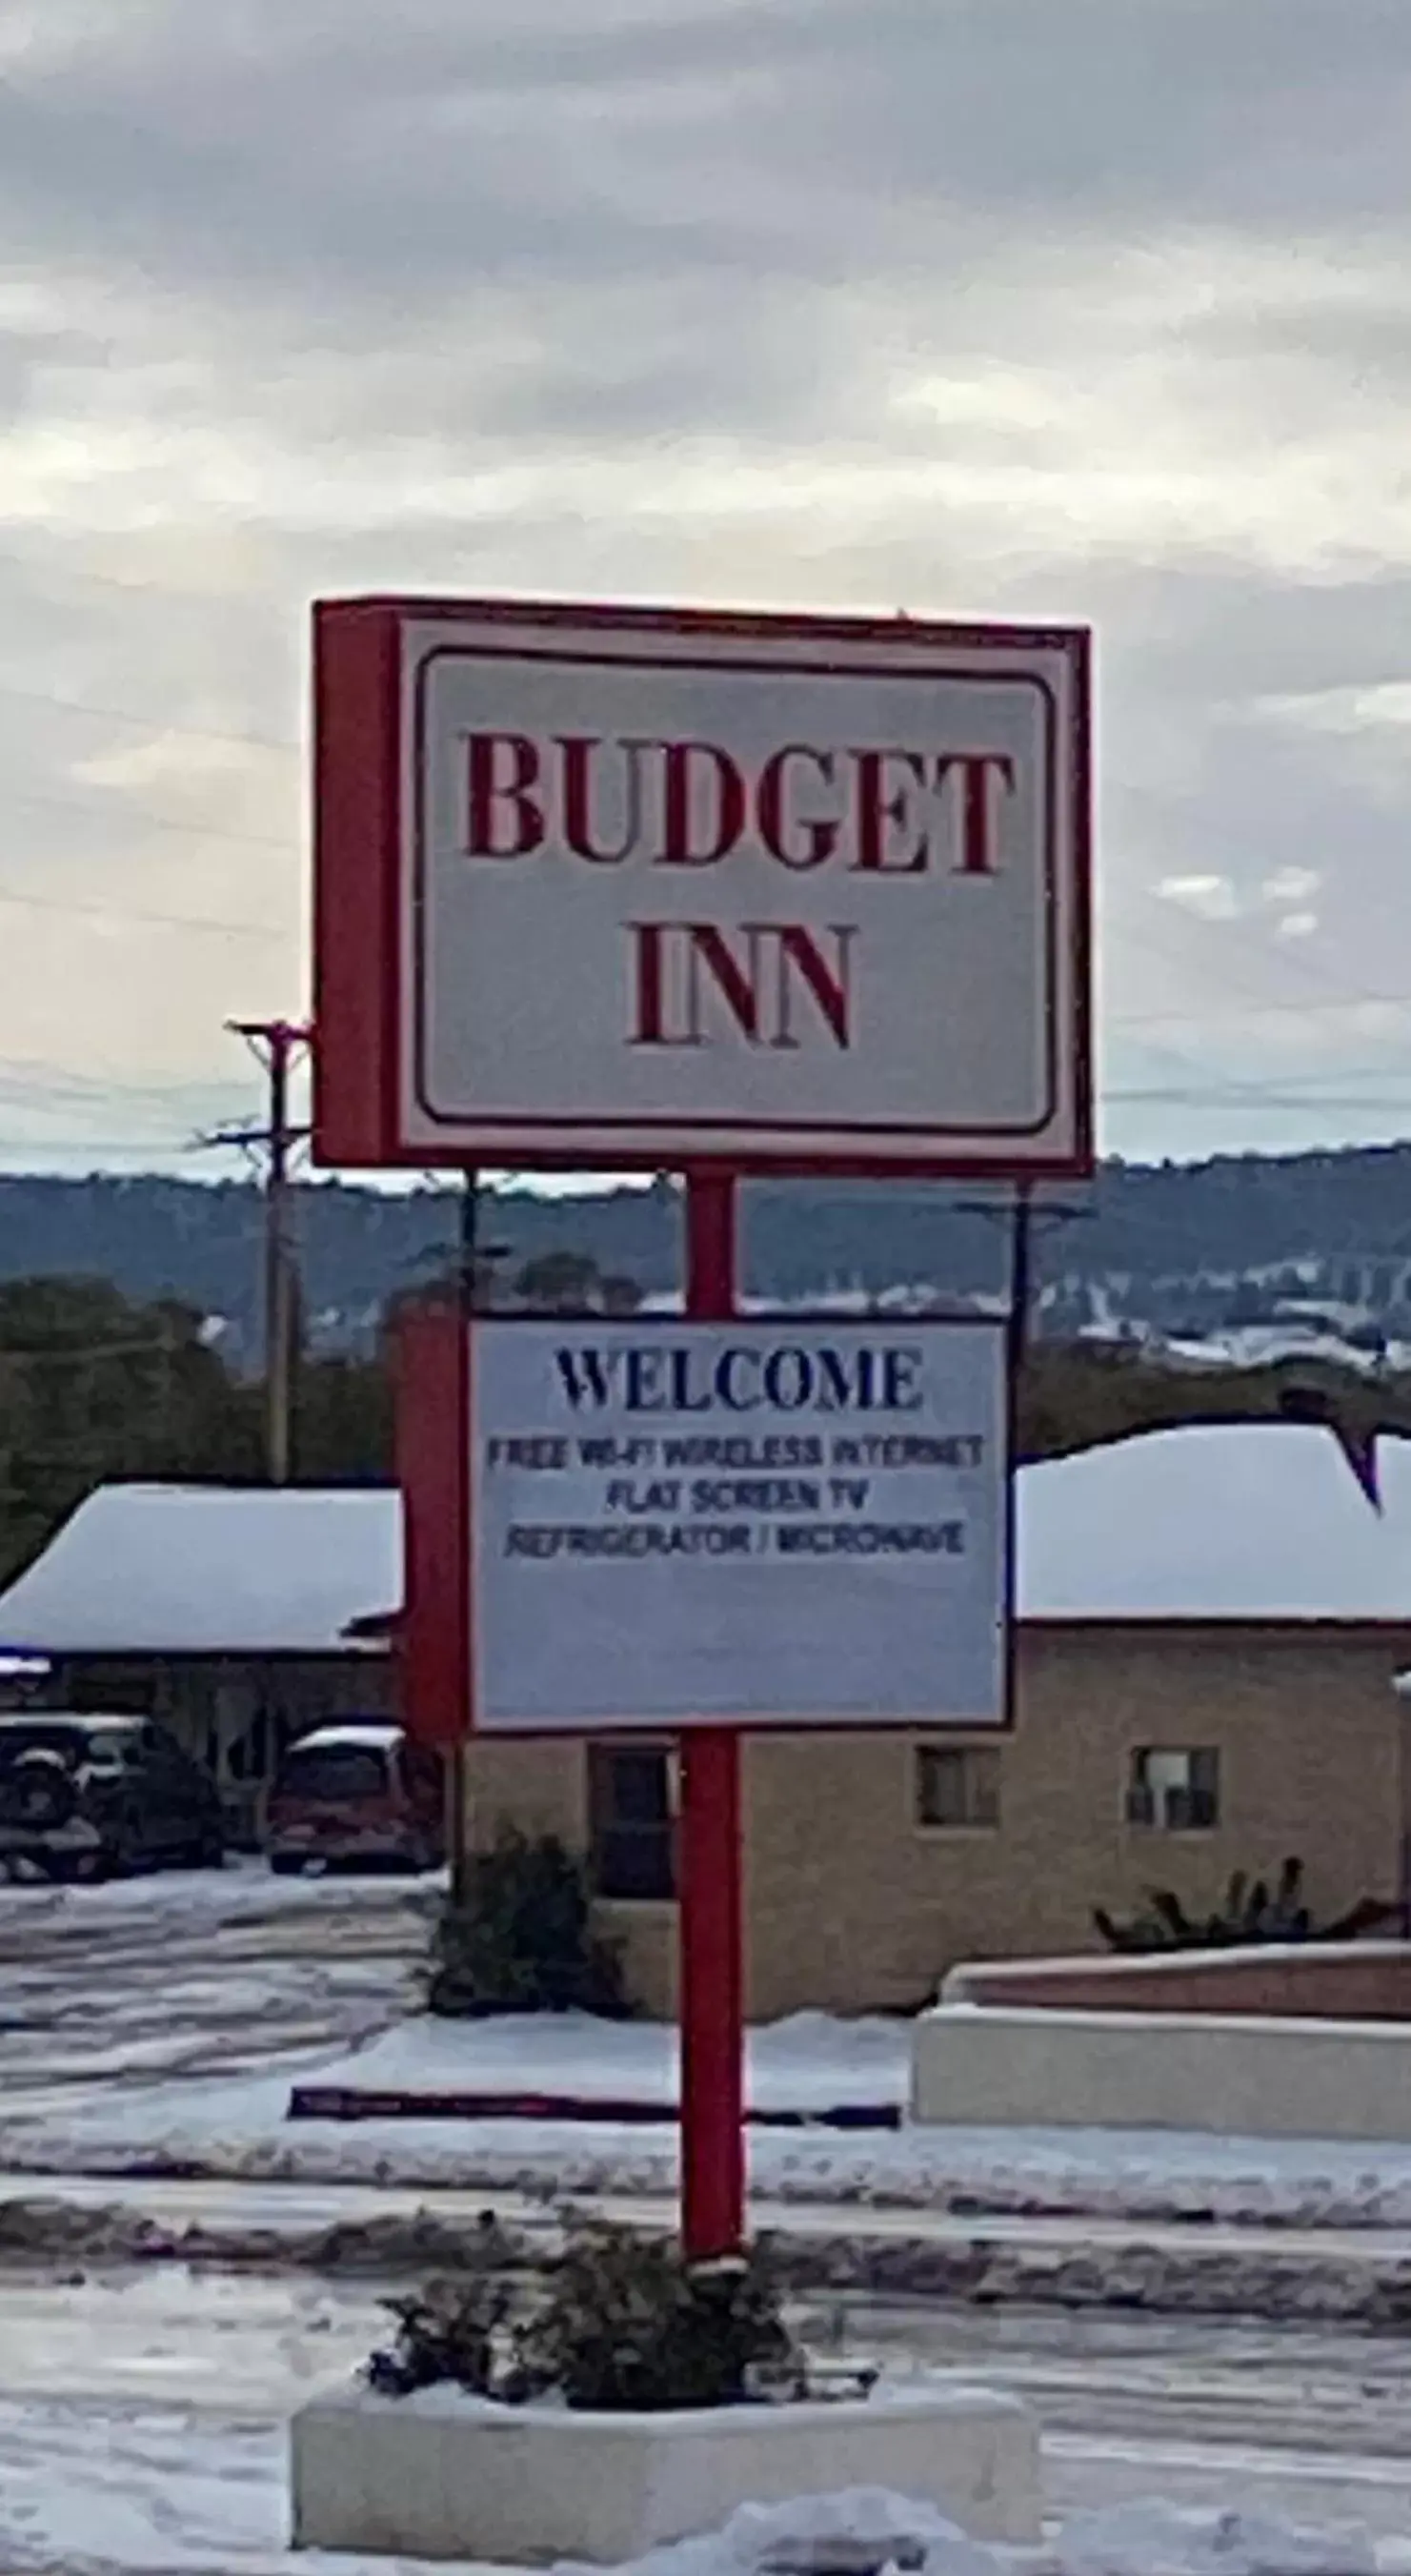 Property logo or sign in Budget Inn Las Vegas New Mexico